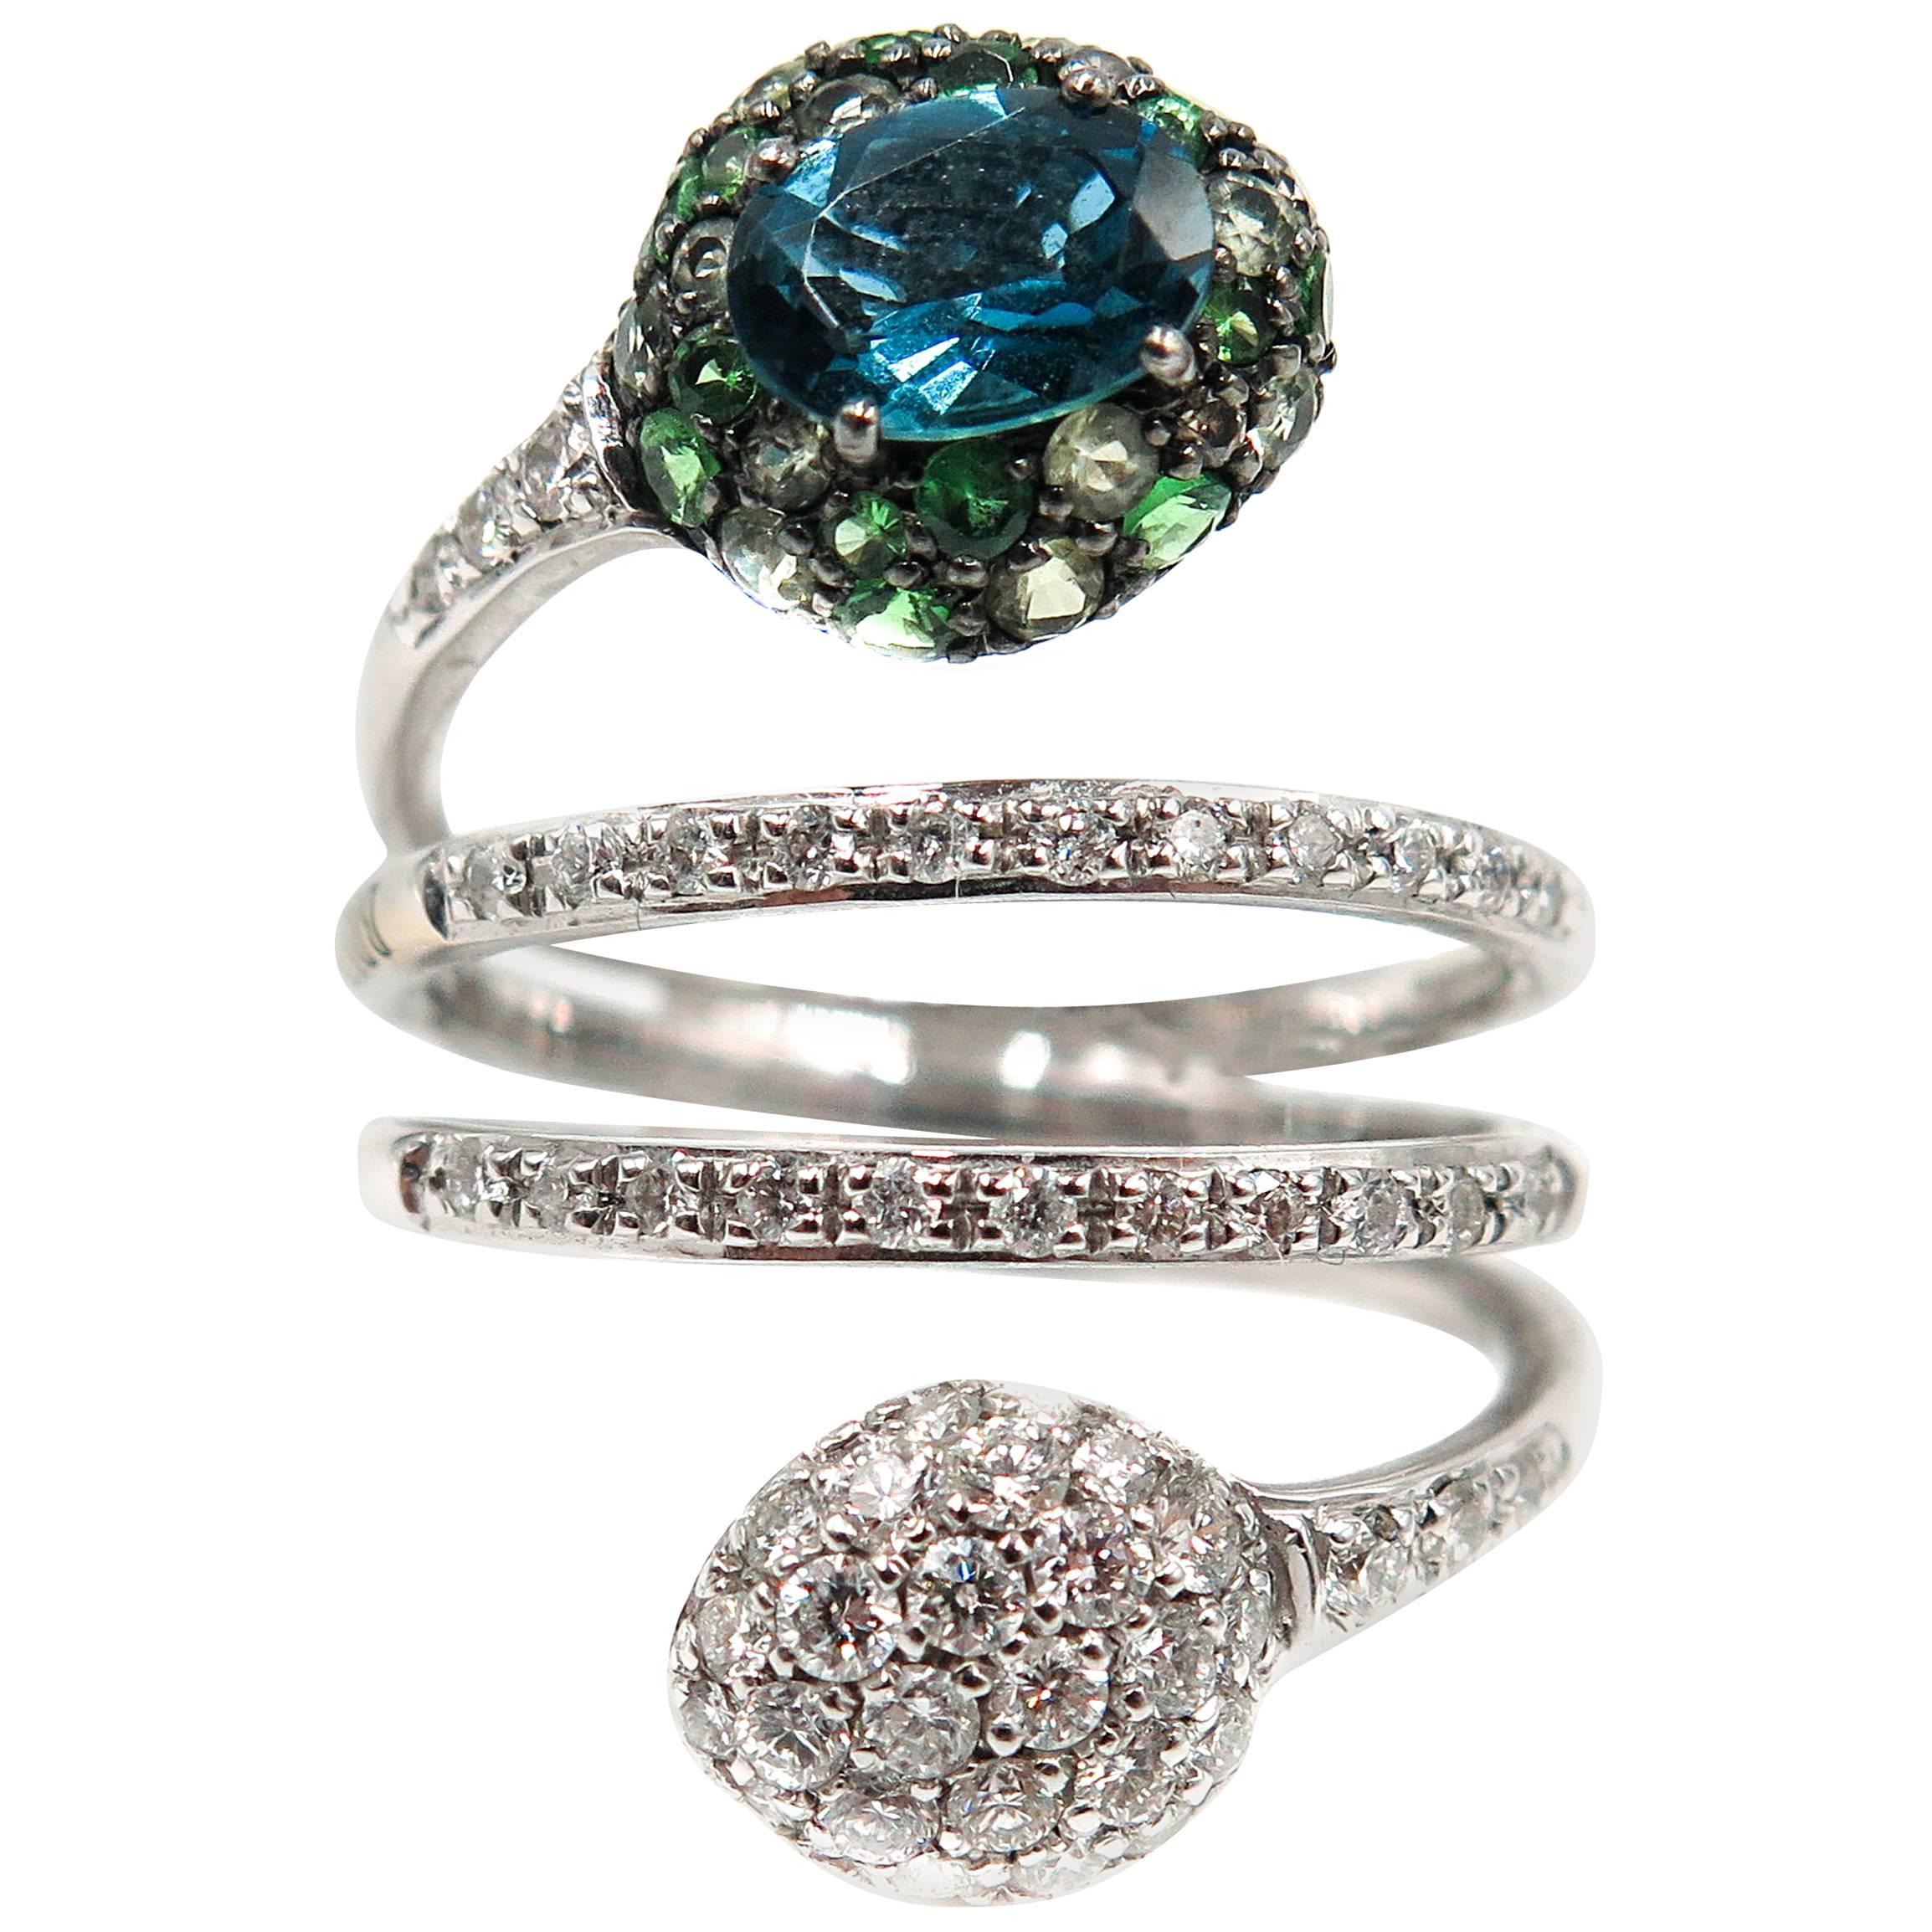 Blue, Green Tourmaline and Diamond White Gold Ring by Brumani